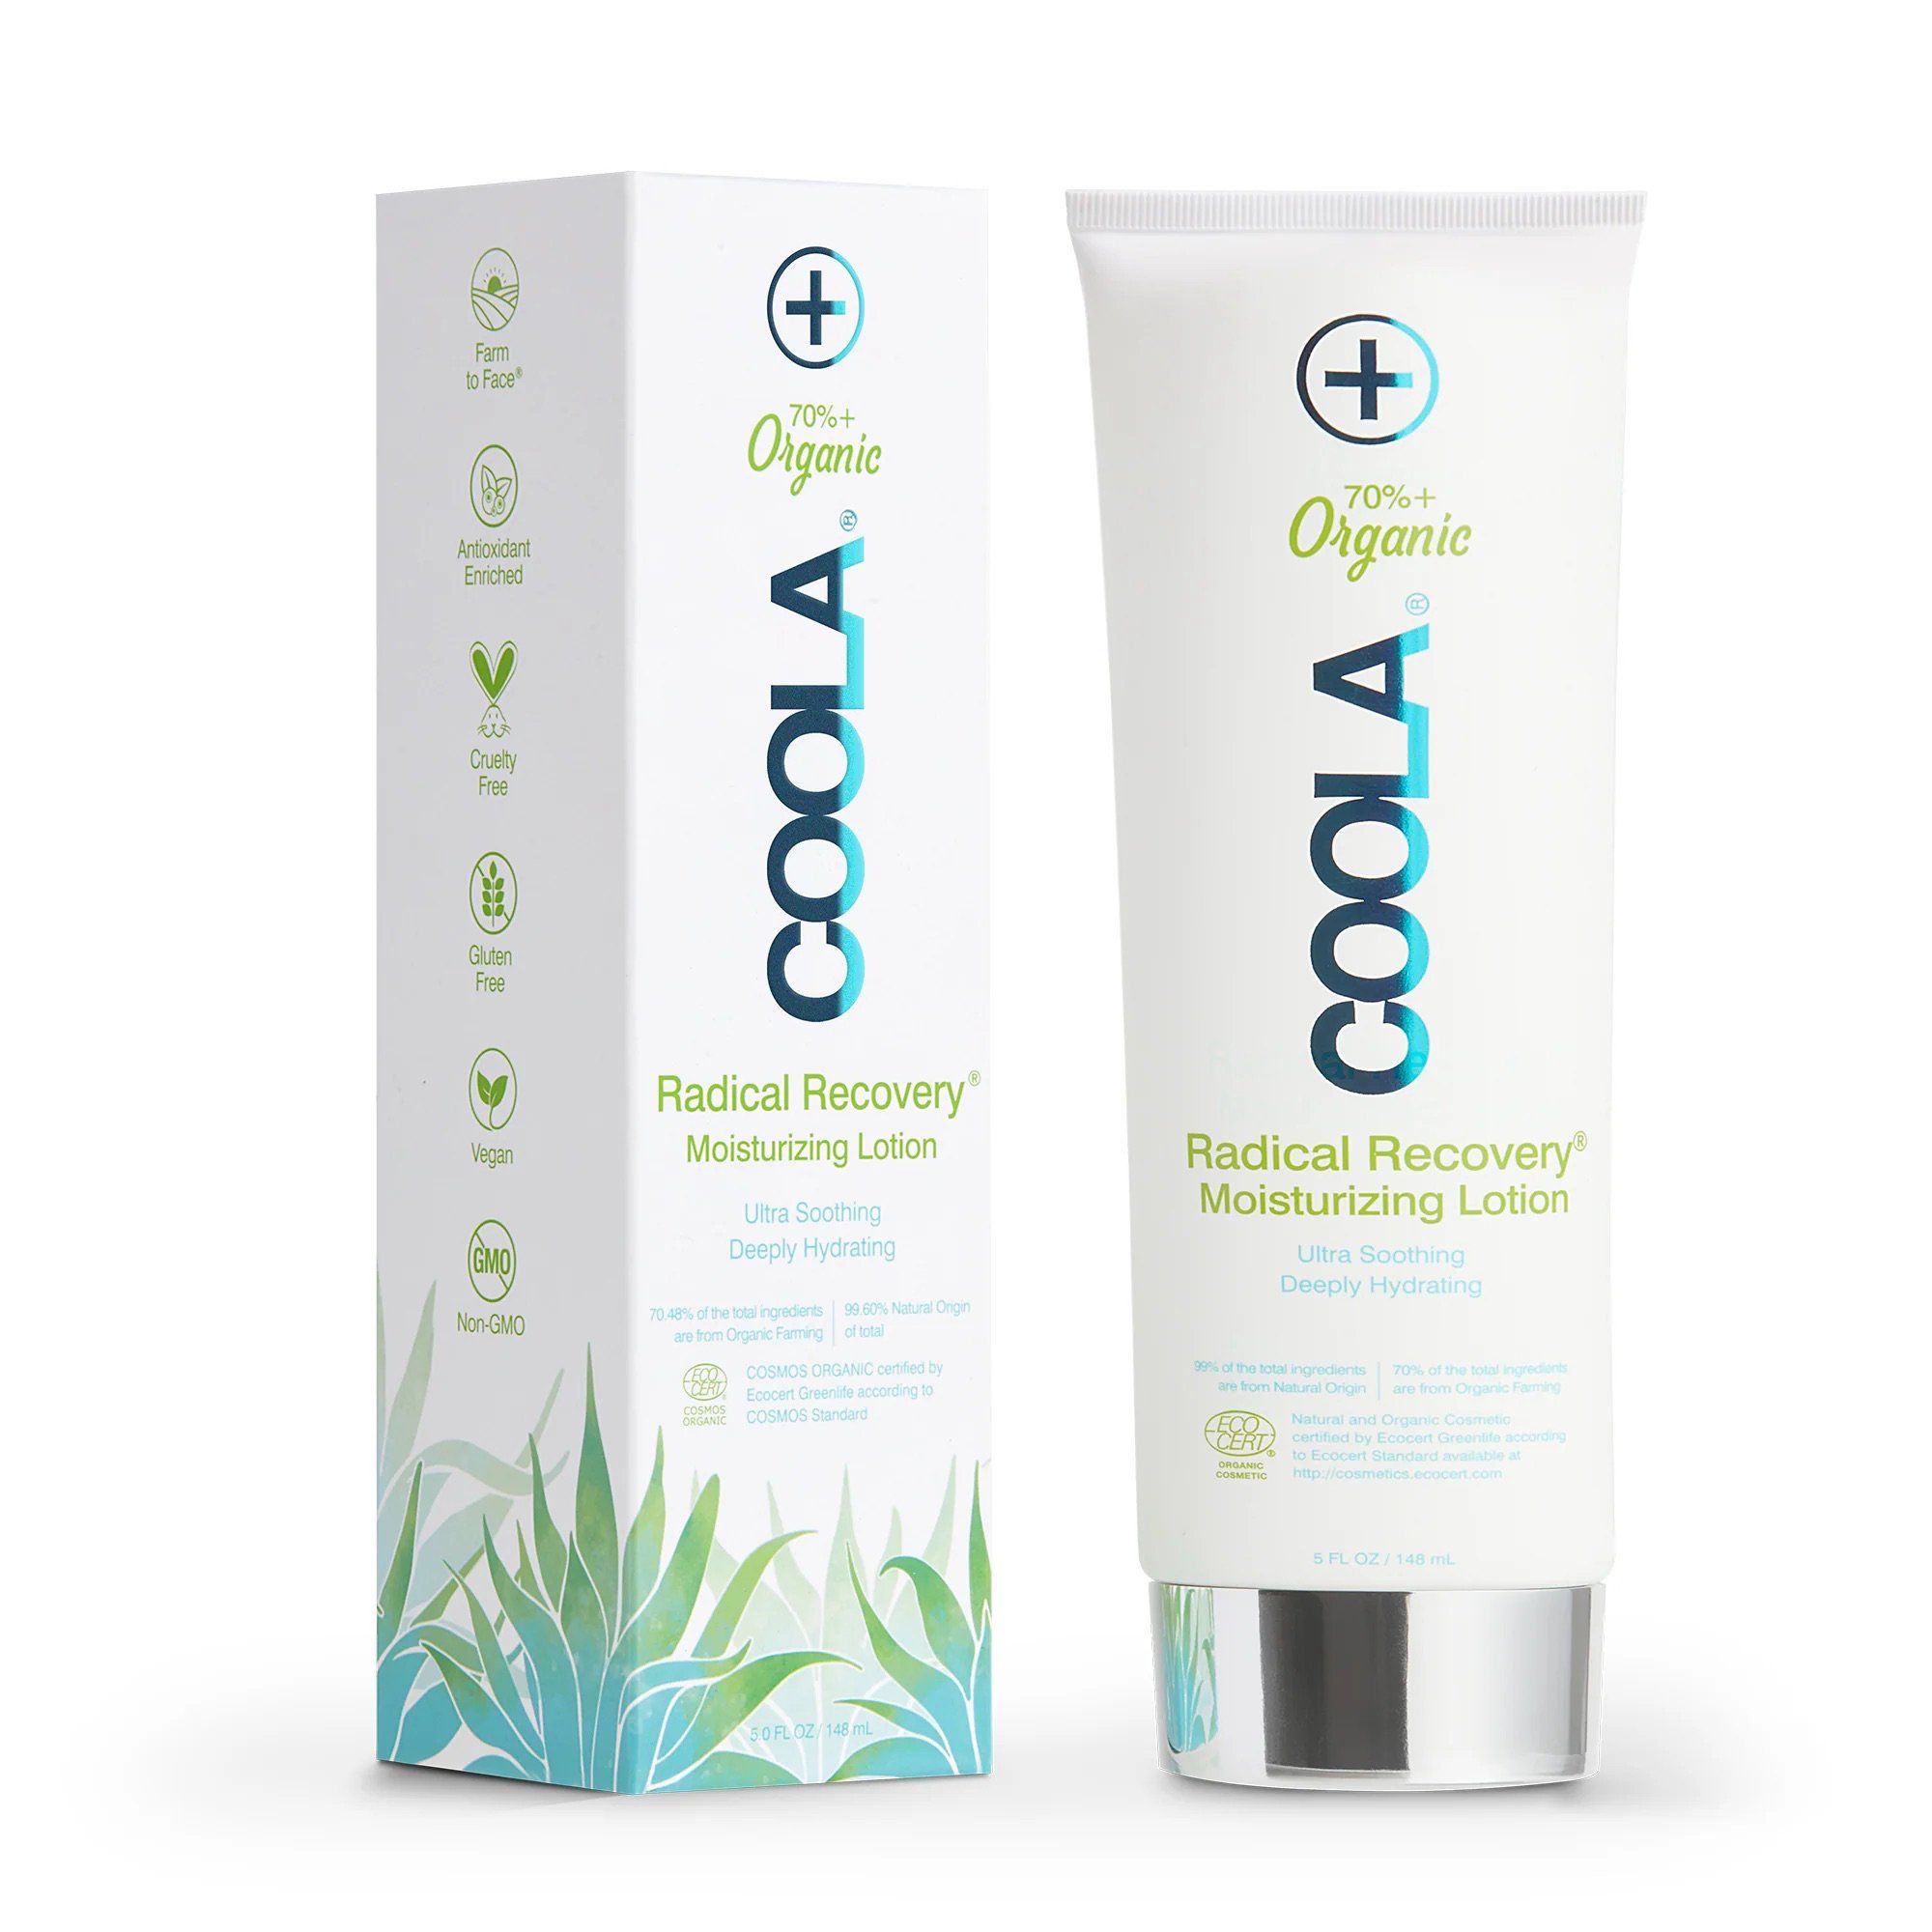 COOLA Radical Recovery Eco-Cert Organic After Sun Lotion - 5 fl oz